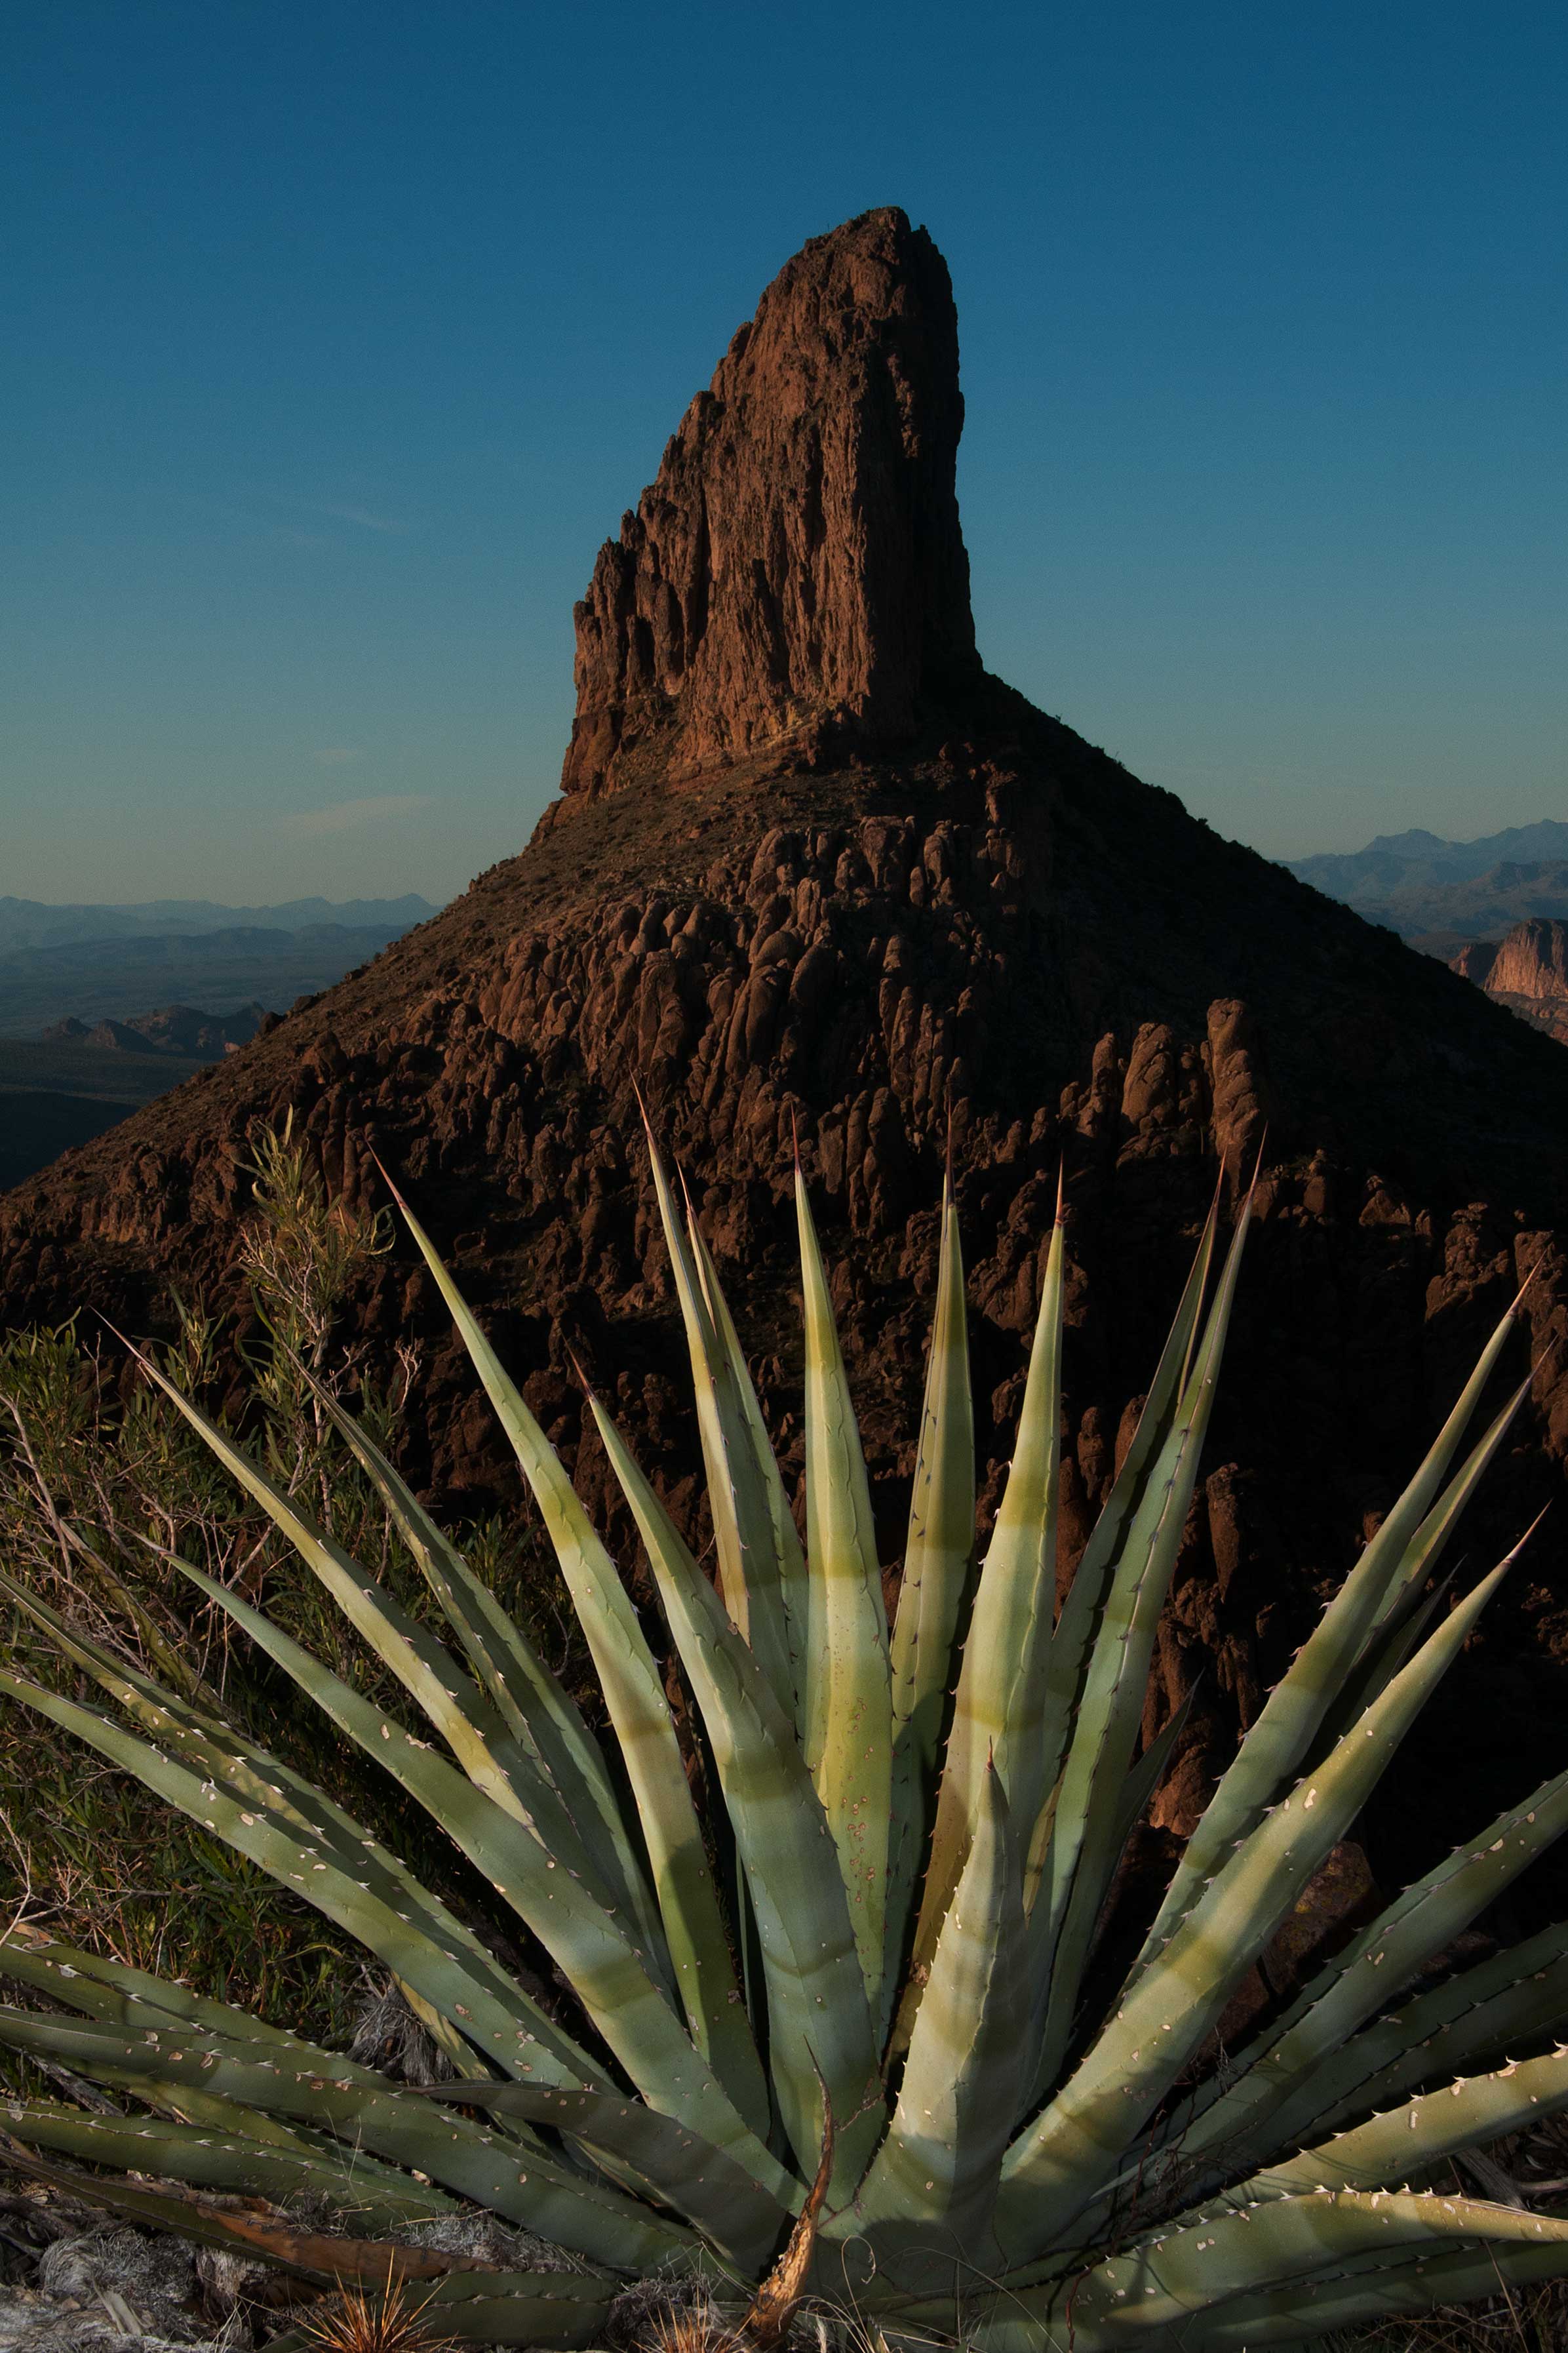 Agave "cactus" beneath Weaver's Needle in the Superstition Mts., Arizona